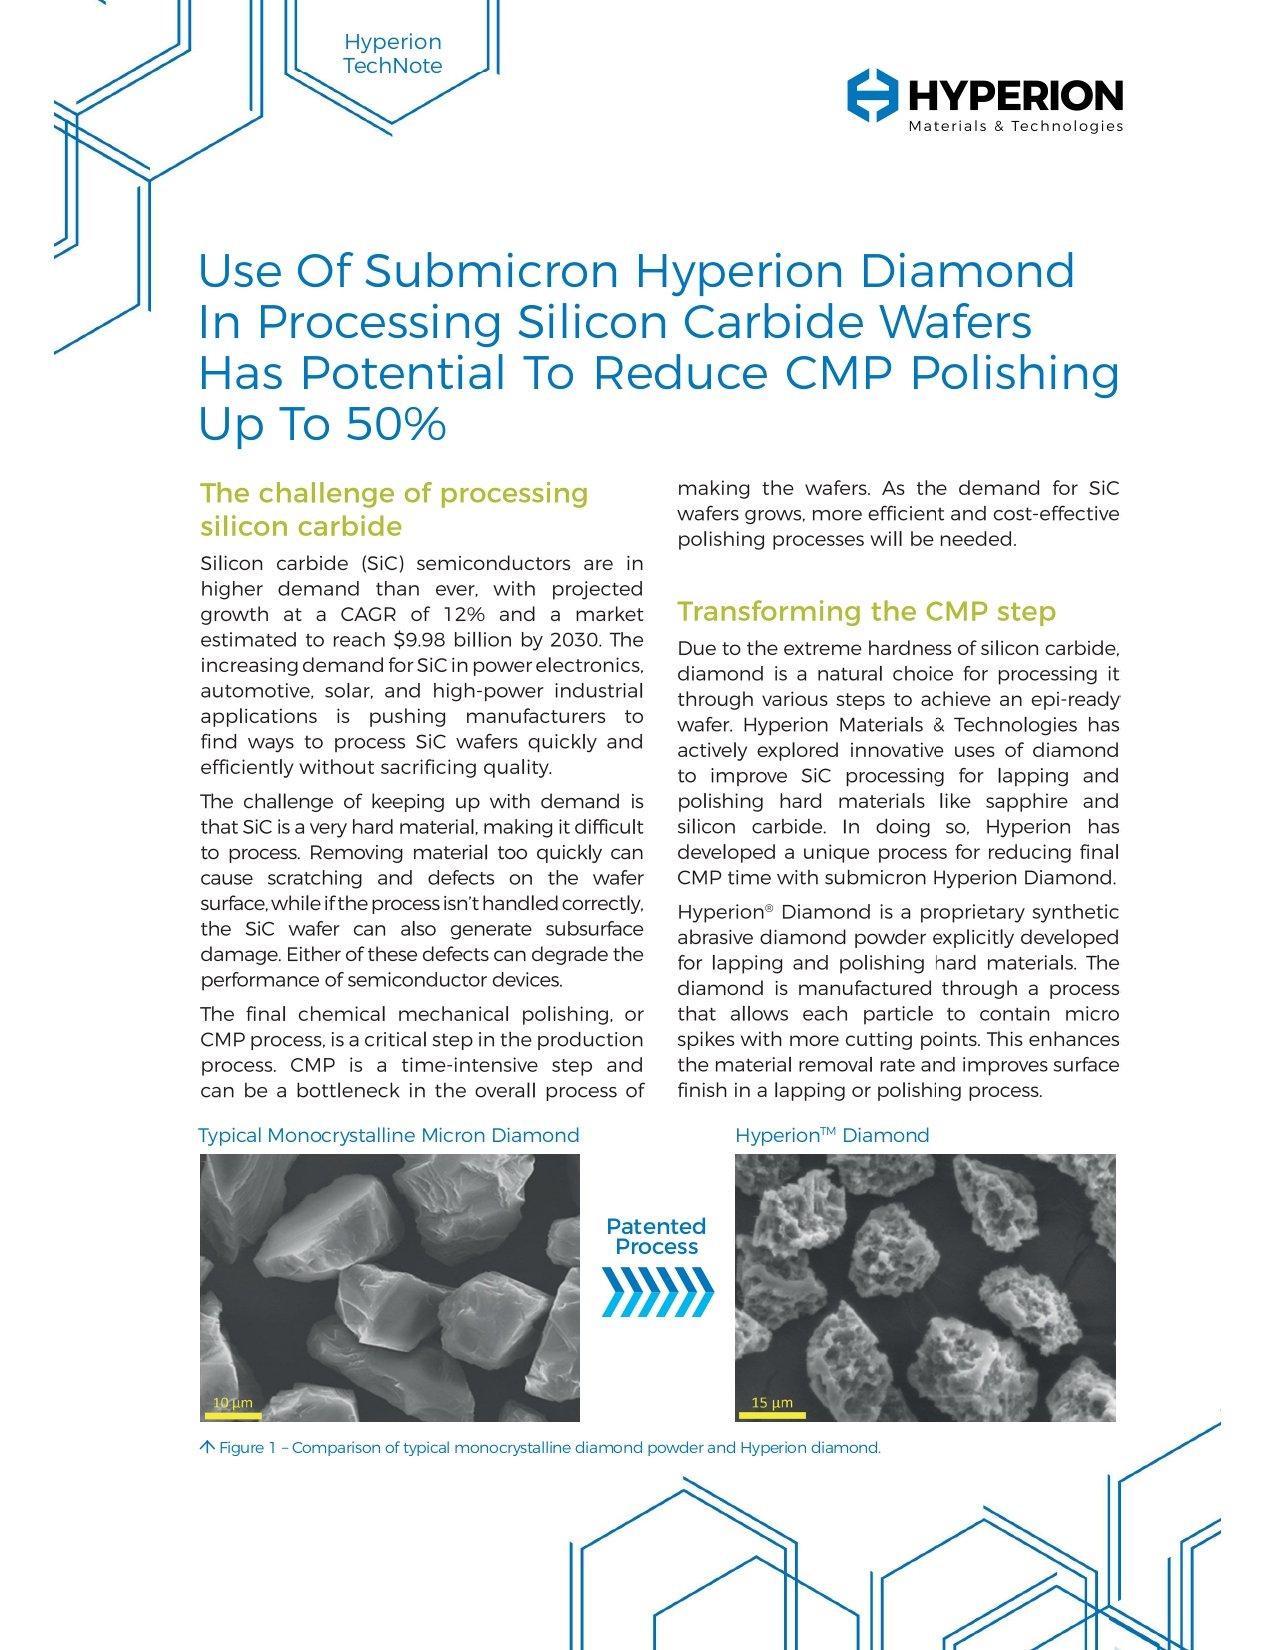 Hyperion enables improved silicon carbide wafer production with reduced CMP polishing